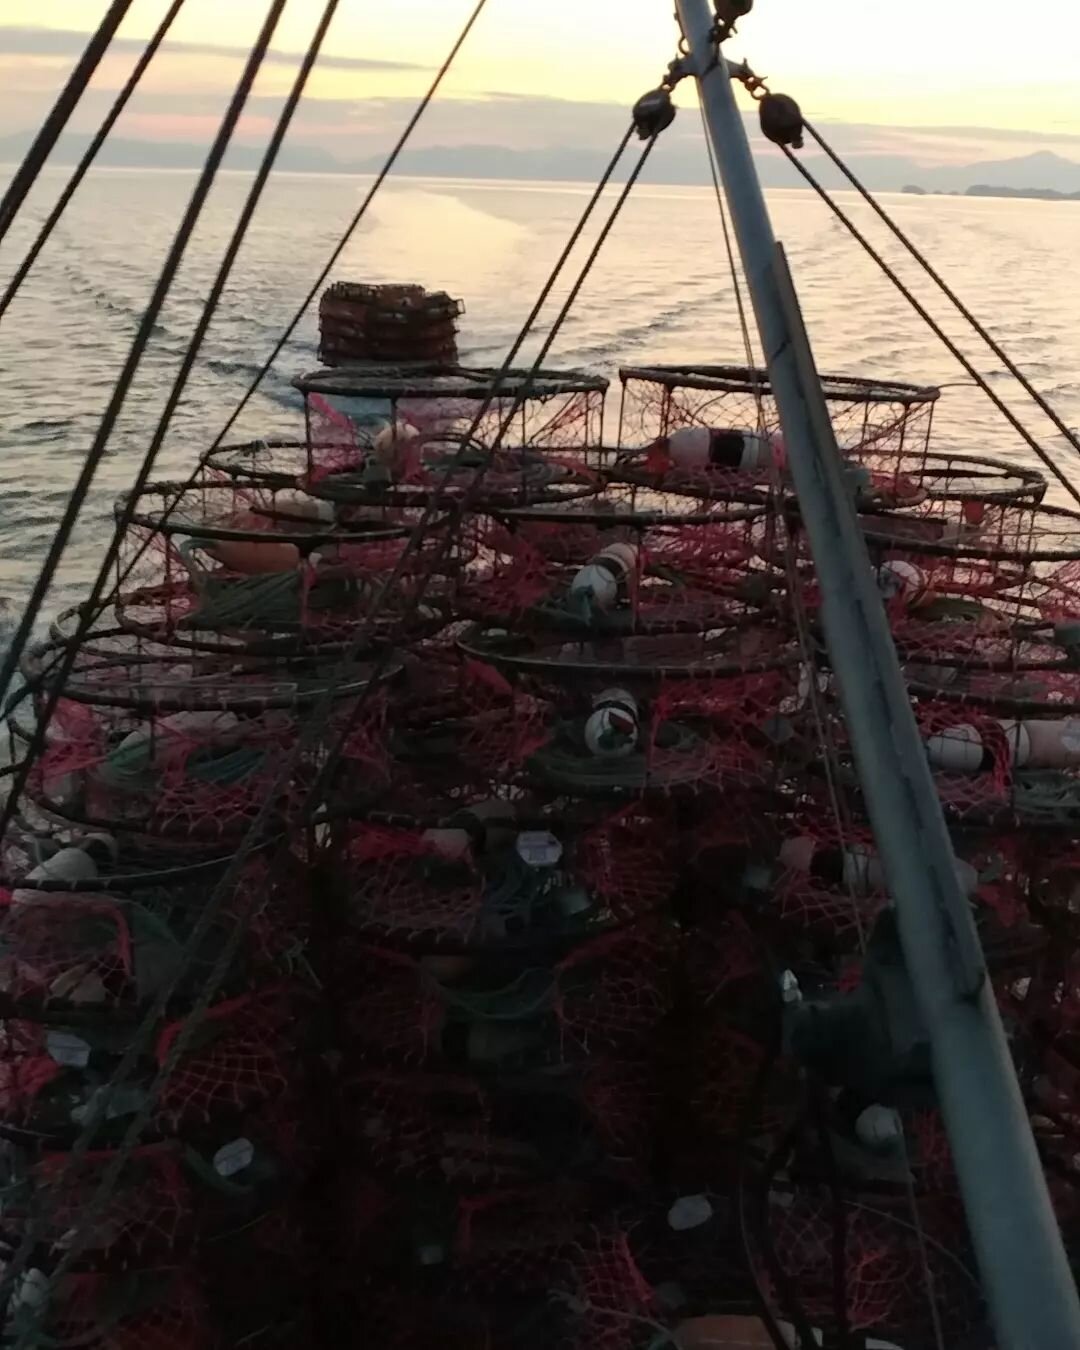 Nice night for a boat ride. I can't wait to get these in the water tomorrow morning. #dungifishing #commercialfishing #dungenesscrab #commercialfisherman #sealaska